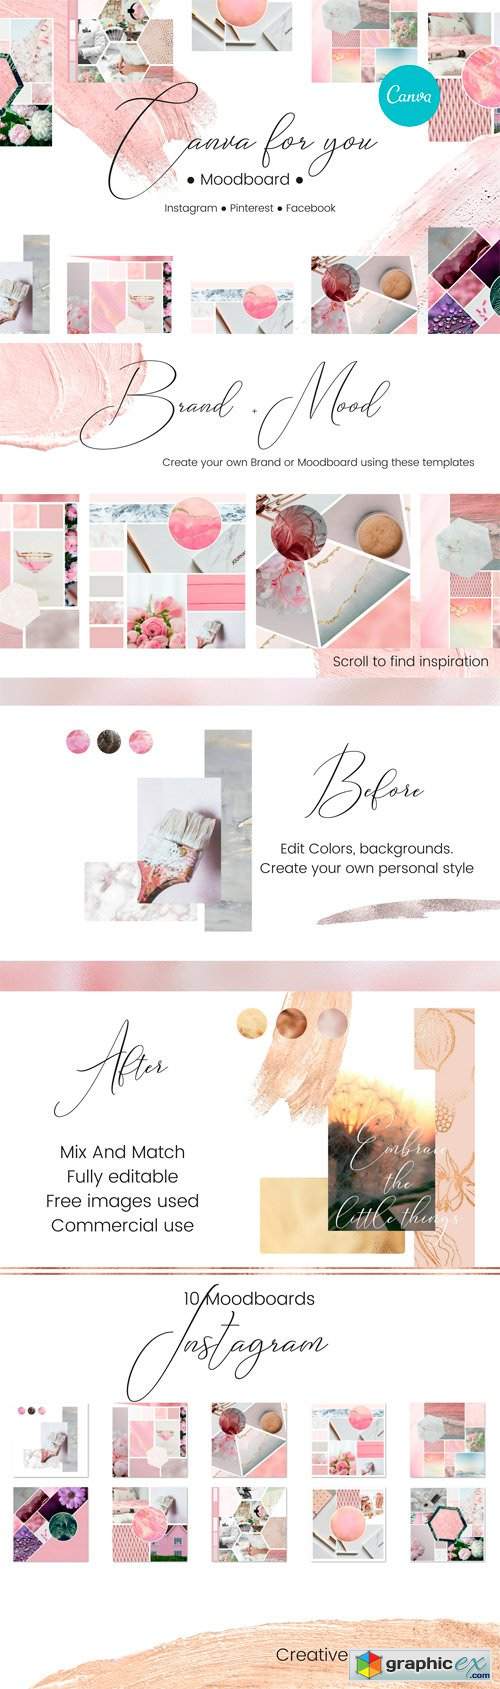 Canva for you - Moodboard